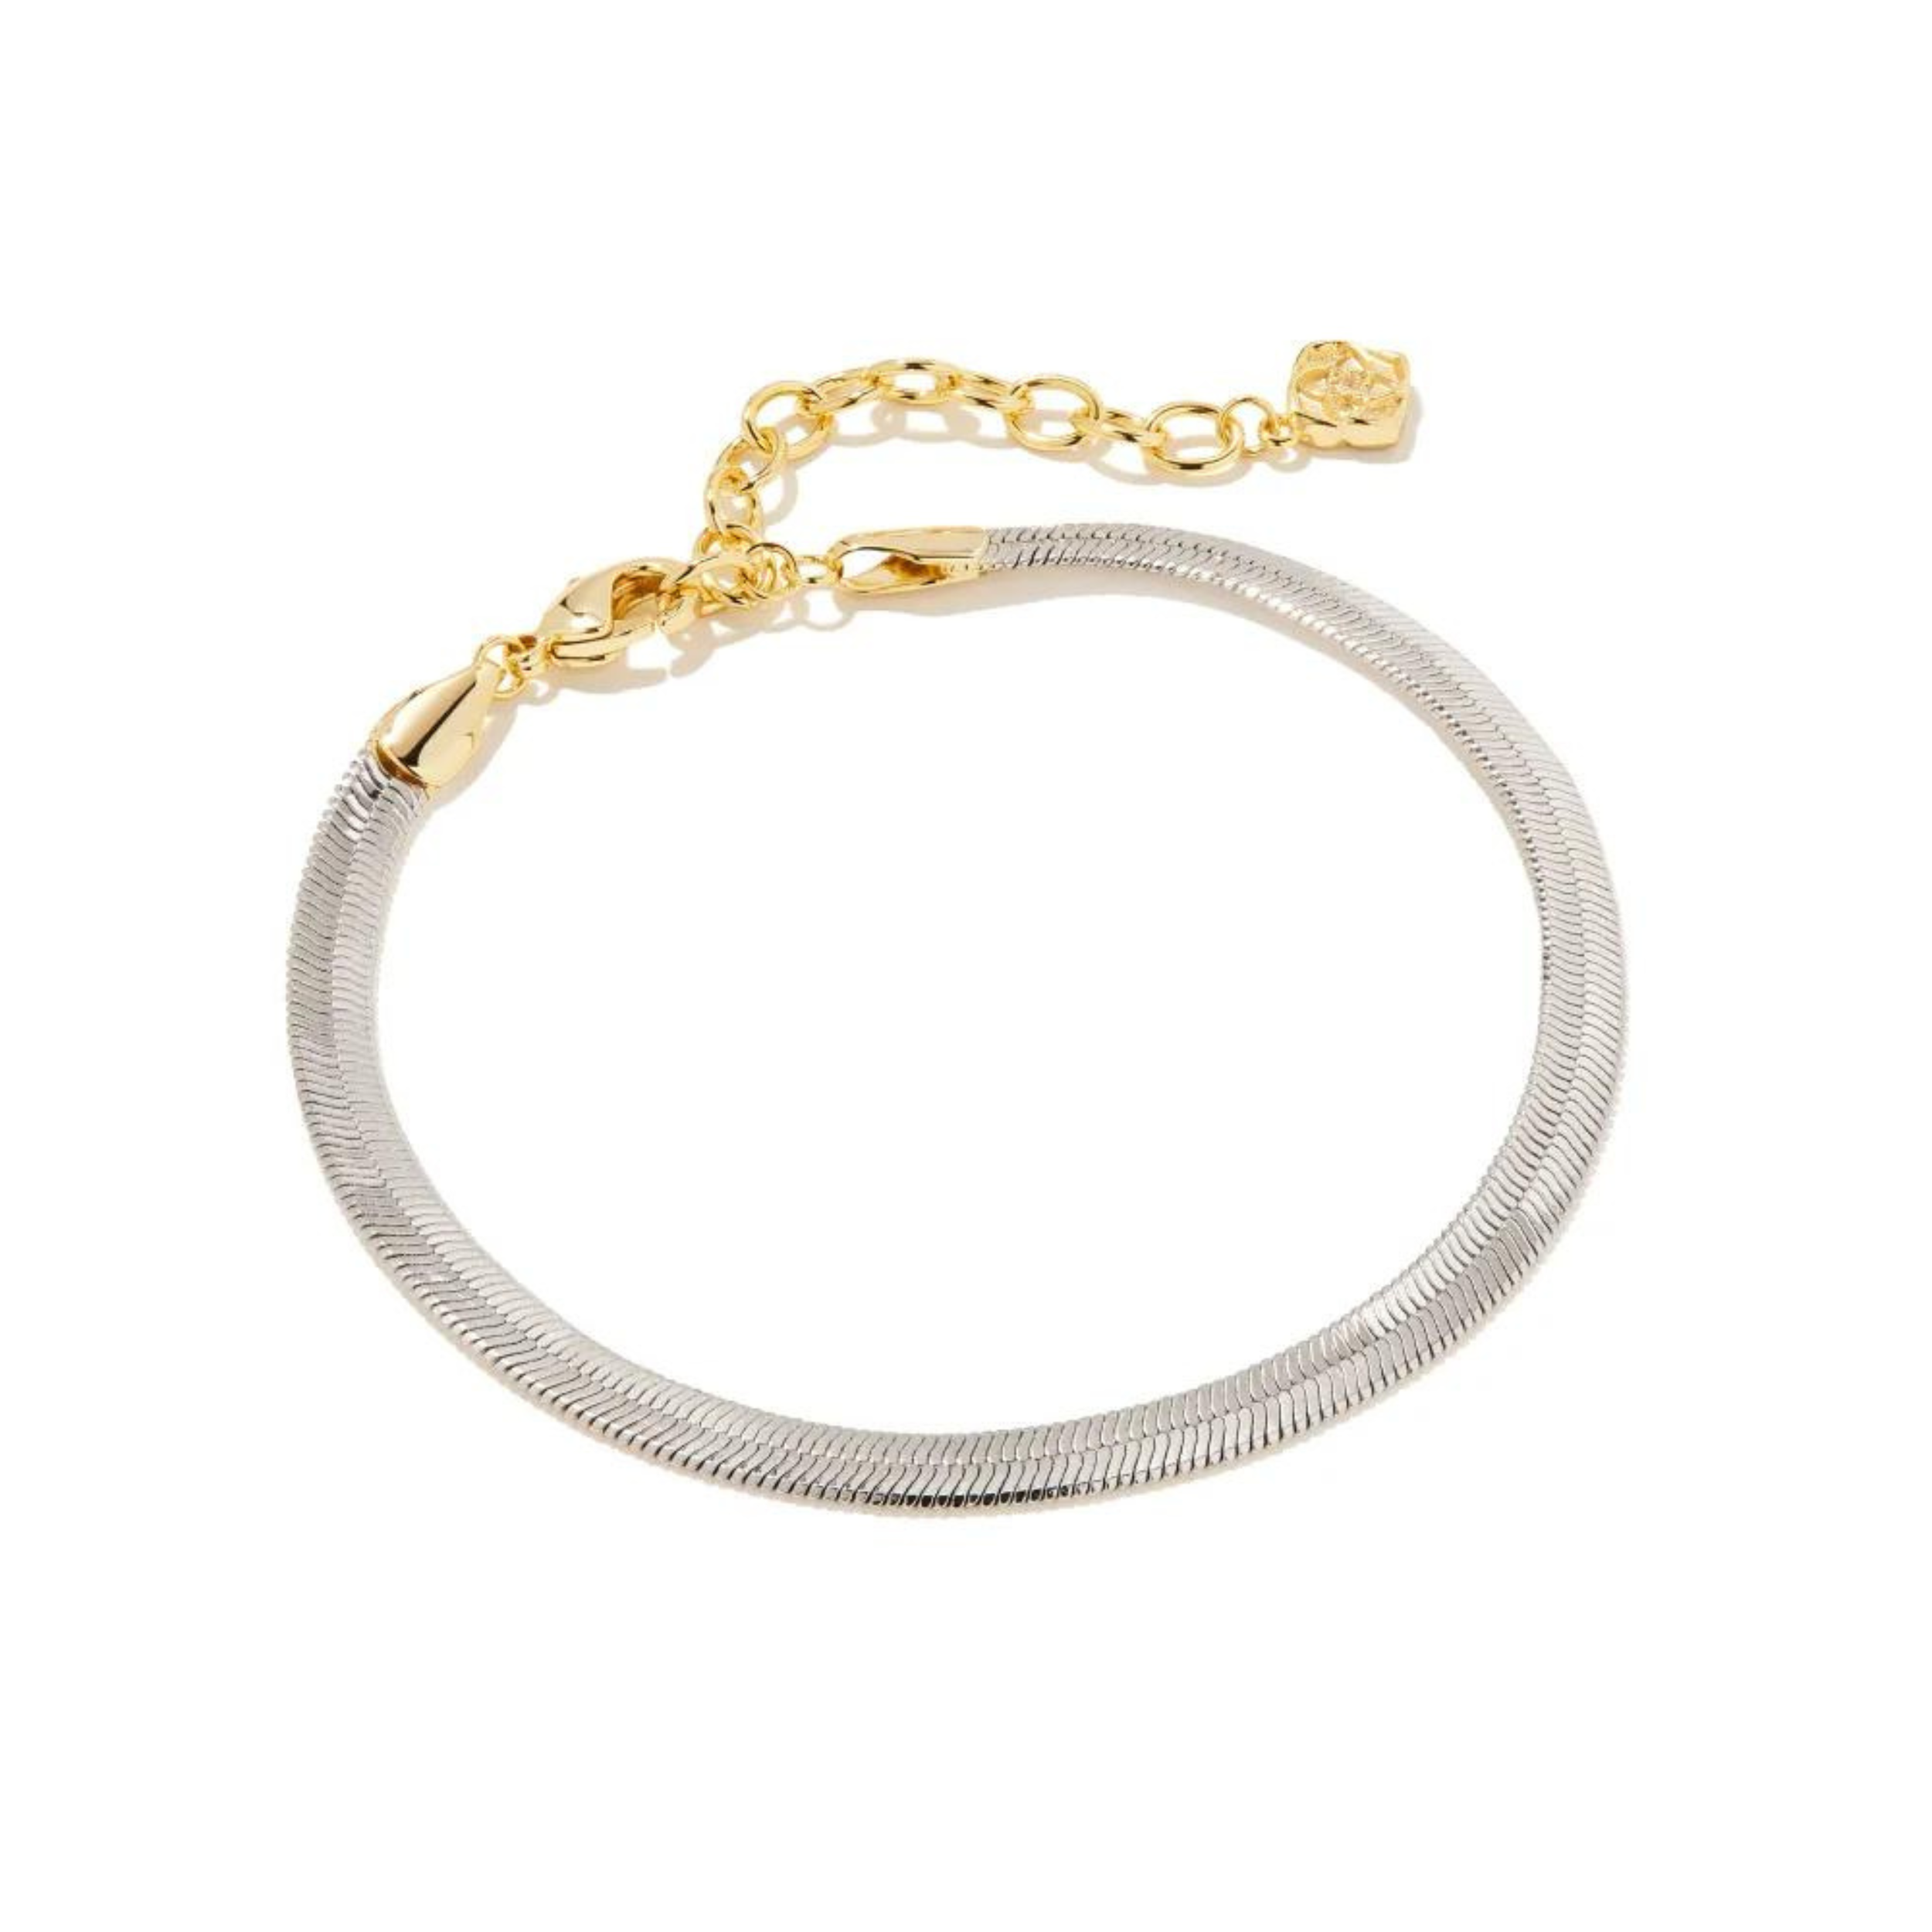 Kendra Scott | Kassie Link and Chain Bracelet in Mixed Metal - Giddy Up Glamour Boutique